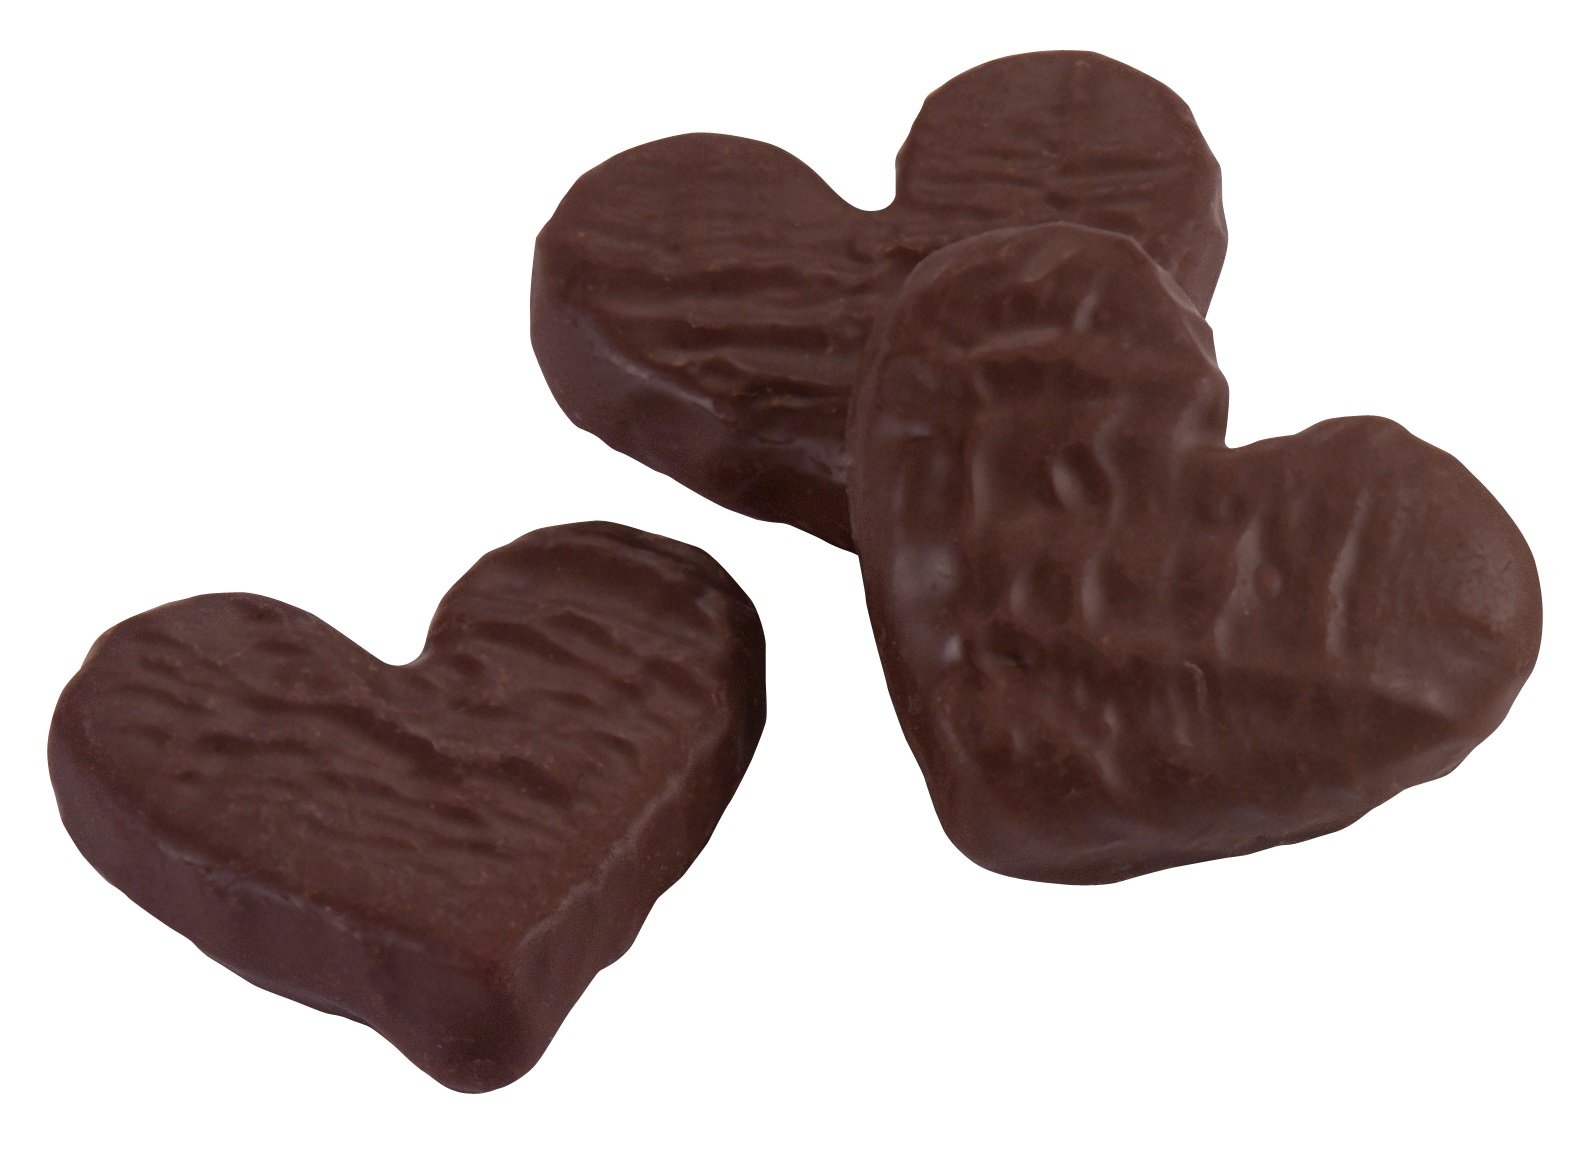 three heart shaped chocolate coated kendal mint cake pieces